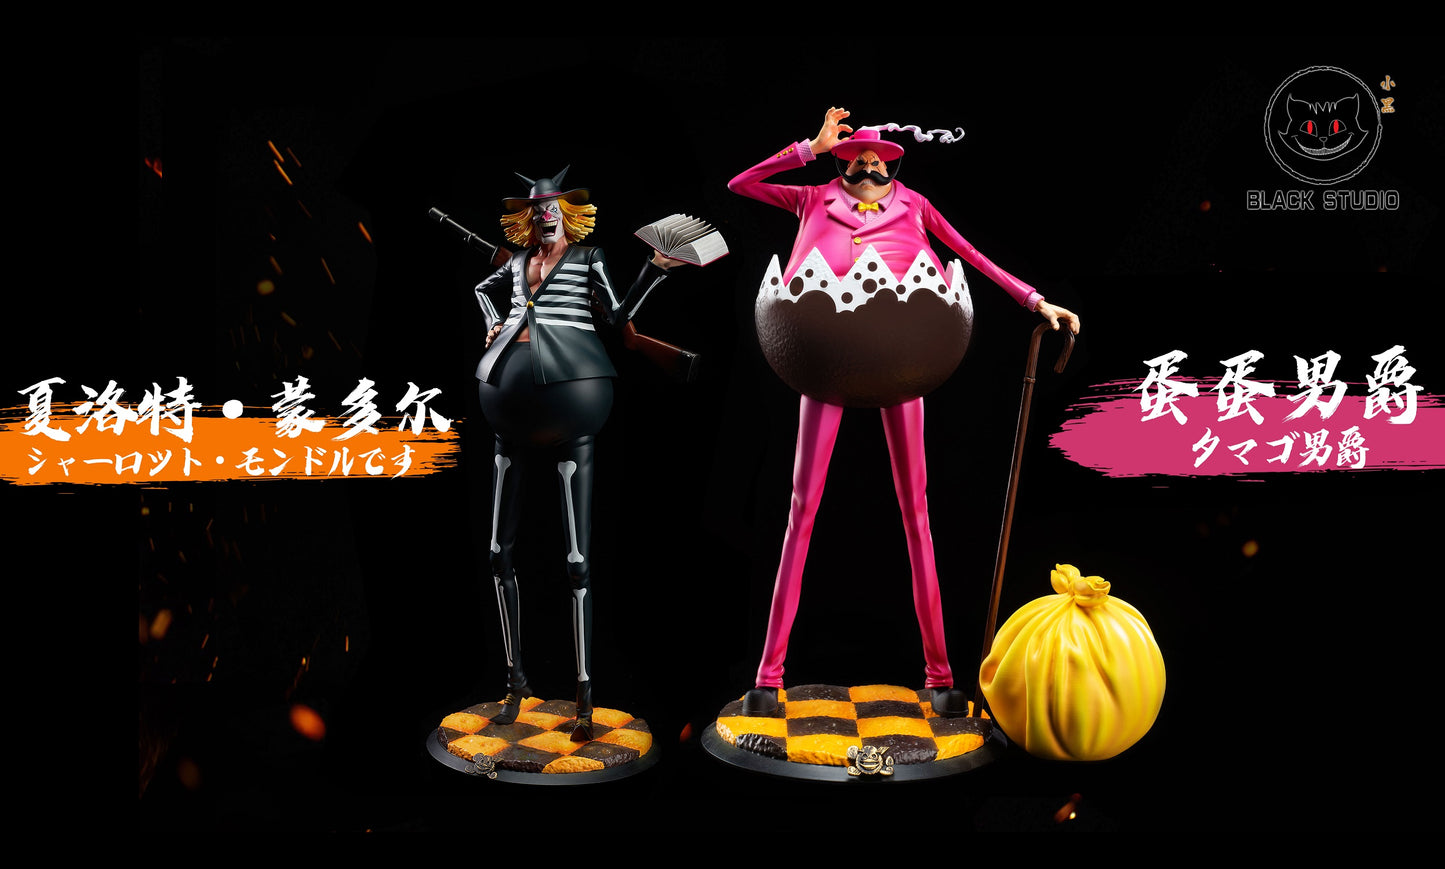 Black Studio - Charlotte Family Mont-d'Or and Tamago [PRE-ORDER CLOSED]